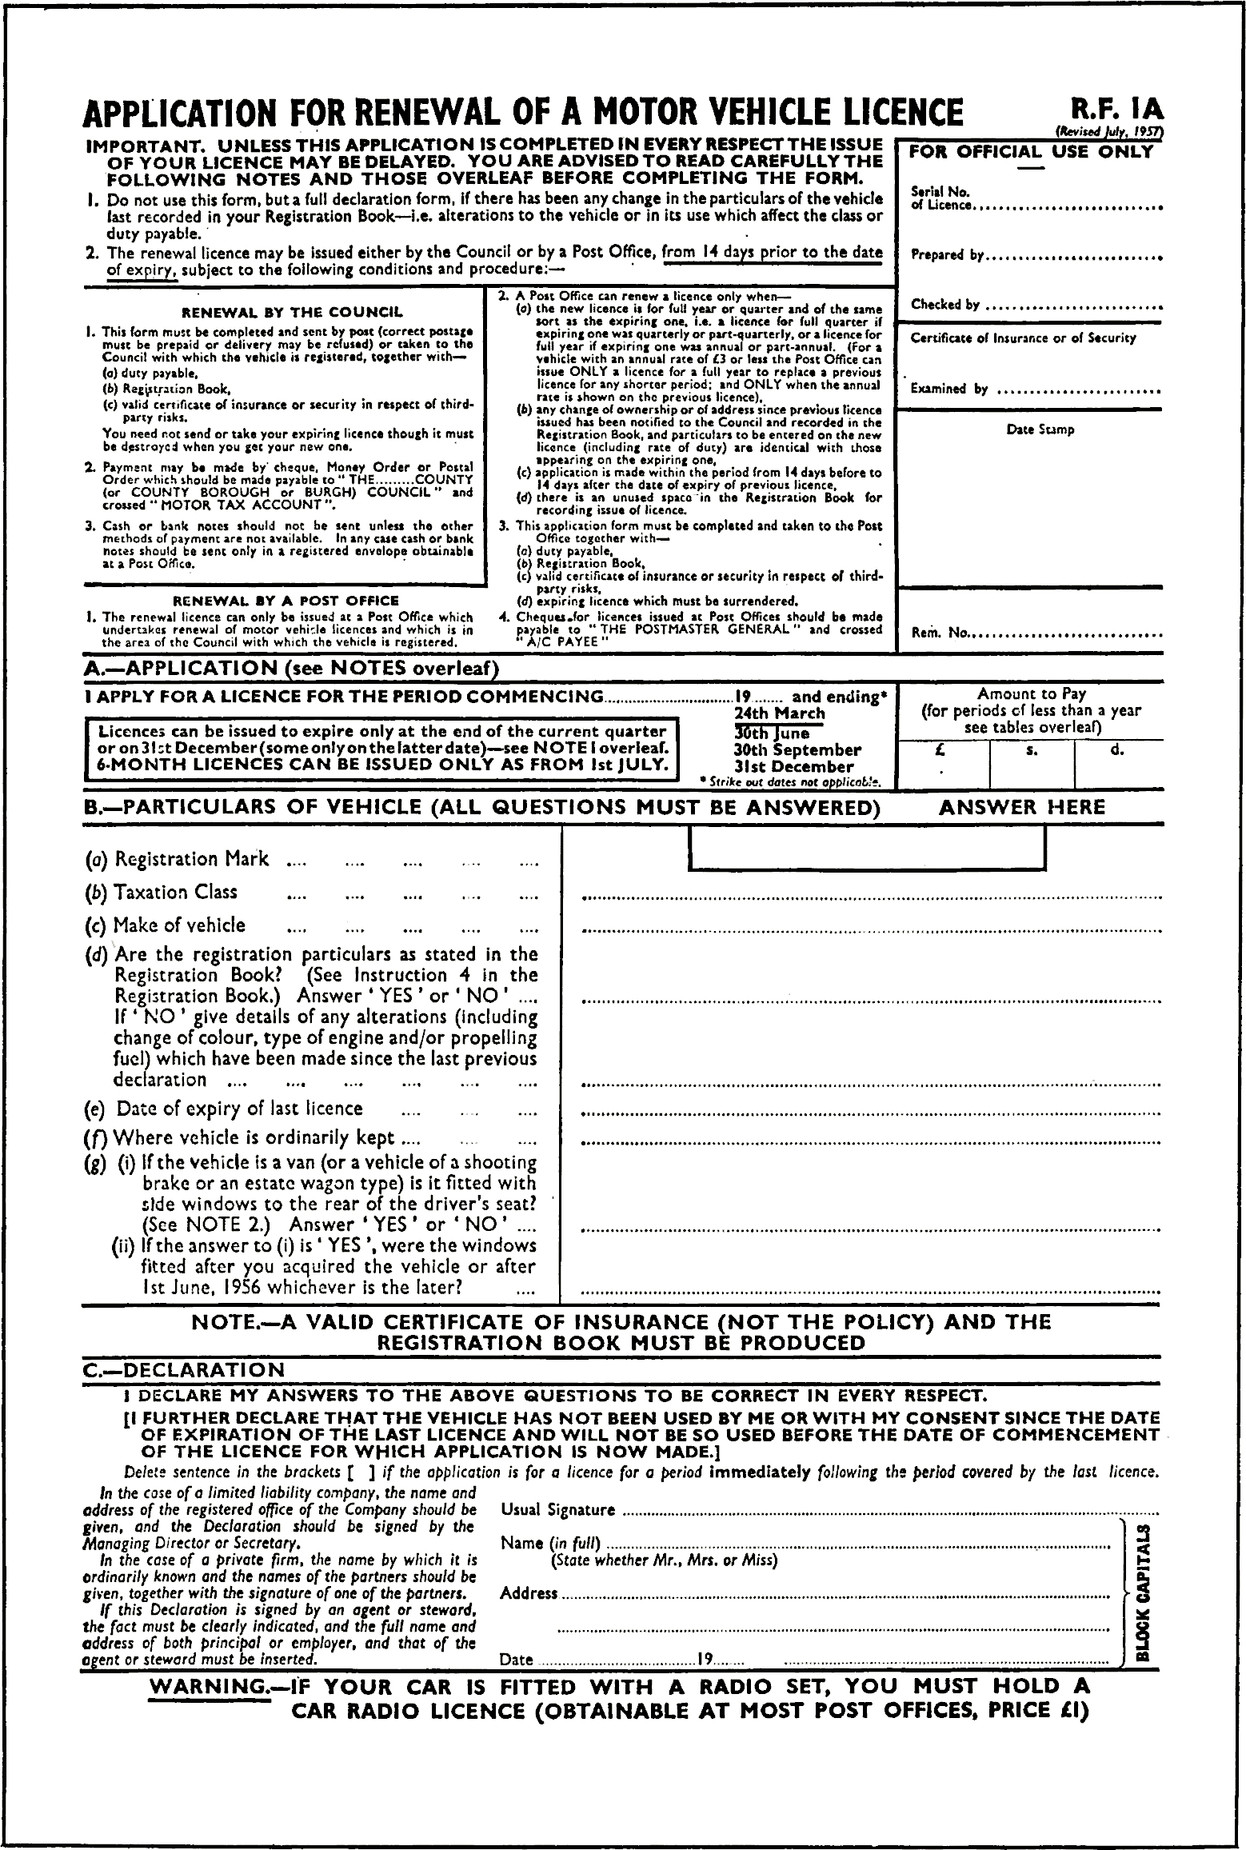 Form with title APPLICATION FOR RENEWAL OF A MOTOR VEHICLE LICENCE.
R.F. 1A.
(Revised July, 1957).
1. Do not use this form, but a full declaration form, if there has been any change in the particulars of the vehicle
last recorded in your Registration Book—i.e. alterations to the vehicle or in its use which affect the class or
duty payable.
2. The renewal licence may be issued either by the Council or by a Post Office, from 14 days prior to the date
of expiry, subject to the following conditions and procedure:-
Section RENEWAL BY THE COUNCIL
1. This form must be completed and sent by post (correct postage must be prepaid or delivery may be refused) or taken to the Council with which the vehicle is registered, together with—
(a) duty payable,
(b) Registration Book,
(c) valid certificate of insurance of security in respect of third-party risks.
You need not send or take your expiring licence though it must be destroyed when you get your new one.
2. Payment may be made by cheque, Money Order or Postal Order which should be made payable to  THE.........COUNTY
(or COUNTY BOROUGH or BURGH) COUNCIL” and
crossed “MOTOR TAX ACCOUNT”.
3. Cash or bank notes should not be sent unless the other
methods of payment are not available. In any case cash or bank notes should be sent only in a registered envelope obtainable at a Post Office.
Section RENEWAL BY A POST OFFICE
1. The renewal licence can only be issued at a Post Office which
undertakes renewal of motor vehicle licences and which is in
the area of the Council with which the vehicle is registered.
2. A Post Office can renew a licence only when—
(a) the new licence is for full year or quarter and of the same
sort as the expiring one, i.e. a licence for full quarter if
expiring one was quarterly or part-quarterly, or licence for
full year if expiring one was annual or part-annual. (For
vehicle with an annual rate of £3 or less the Post Office can
issue ONLY a licence for a full year to replace a previous
licence for any shorter period; and ONLY when the annual
rate is shown on the previous licence).
(b) any change of ownership or of address since previous licence issued has been notified to the Council and recorded in the Registration Book, and particulars to be entered on the new licence (including’ rate of duty) are identical with those
appearing on the expiring one.
(c) application is made within the period from 14 days before to 14 days alter the date of expiry of previous licence.
(d) there is an unused space in the Registration Book for
recording issue of licence.
3. This application form must be completed and taken to the Post Office together with—
(a) duty payable.
(b) Registration Book.
(c) valid certificate of insurance or security in respect of third-party risks.
(d) expiring licence which must be surrendered.
4. Cheques for licences issued ac Post Officer should be made
payable to THE POSTMASTER GENERAL” and crossed “A/C PAYEE”.
Section FOR OFFICIAL USE ONLY
Serial No. of Licence, blank field.
Prepared by, blank field.
Checked by, blank field.
Certificate of Insurance or of Security.
Examined by, blank field.
Date Stamp, blank field.
Rem. No. blank field.
Section A—APPLICATION (see NOTES overleaf).
I APPLY FOR A LICENCE FOR THE PERIOD COMMENCING, blank field, 19, blank field, and ending *.
* Strike out dates not applicable.
24th March (underlined).
3th June.
30th September.
3st December.
Licences can be issued to expire only at the end of the current quarter or on 31st December (some only on the latter date)-see NOTE 1 overleaf.
6 MONTH LICENCES CAN BE ISSUED ONLY AS FROM 1st JULY.
Section Amount to Pay (for periods of less than a year see tables overleaf), £., blank field, s., blank field, d., blank field.
B.—PARTICULARS OF VEHICLE (ALL QUESTIONS MUST BE ANSWERED) ANSWER HERE.
(a) Registration Mark, 5 blank fields.
(b) Taxation Class, 5 blank fields.
(c) Make of vehicle, 5 blank fields.
(d) Are the registration particulars as stated in the
Registration Book? (See Instruction 4 in the
Registration Book.) Answer ‘YES’ or ‘NO’ , blank field.
If ‘NO’ give details of any alterations (including
change of colour, type of engine and/or propelling
fuel) which have been made since the last previous
declaration, 6 blank fields.
(e) Date of expiry of last licence, 3 blank fields.
(f) Where vehicle is ordinarily kept, 3 blank fields.
(g) (i) If the vehicle is a van (or a vehicle of a shooting
brake or an estate wagon type) is it fitted with side windows to the rear of the driver’s seat?
(See NOTE 2.) Answer ‘YES’ or ‘NO’, blank field.
(ii) If the answer to (i) is ‘YES’, were the windows
fitted after you acquired the vehicle or after 1st June, 1986 whichever is the later?,  blank field.
NOTE.—A VALID CERTIFICATE OF INSURANCE (NOT THE POLICY) AND THE REGISTRATION BOOK MUST BE PRODUCED.
C.—DECLARATION.
I DECLARE MY ANSWERS TO THE ABOVE QUESTIONS TO BE CORRECT IN EVERY RESPECT.
[I FURTHER DECLARE THAT THE VEHICLE HAS NOT BEEN USED BY ME OR WITH MY CONSENT SINCE THE DATE
OF EXPIRATION OF THE LAST LICENCE AND WILL NOT BE SO USED BEFORE THE DATE OF COMMENCEMENT
OF THE LICENCE FOR WHICH APPLICATION IS NOW MADE.].
Delete sentence in the brackets [ ] if the application is for a licence for a period immediately following the period covered by the last licence.
In the case of a limited liability company, the name and
address of the registered office of the Company should be
given, and the Declaration should be signed by the
Managing Director or Secretary.
In the case of a private firm, the name by which it is
ordinarily known and the names of the partners should be
given, together with the signature of one of the partners.
If this Declaration is signed by an agent or steward,
the fact must be clearly indicated, and the full name and
address of both principal or employer, and that of the
agent or steward must be inserted.
(In block capitals).
Usual Signature, blank field.
Name (in full) (State whether Mr., Mrs. or Miss), blank field.
Address, blank field.
Date, blank field, 19, blank field.
WARNING—IF YOUR CAR IS FITTED WITH A RADIO SET, YOU MUST HOLD A CAR RADIO LICENCE (OBTAINABLE AT MOST POST OFFICES, PRICE £1)